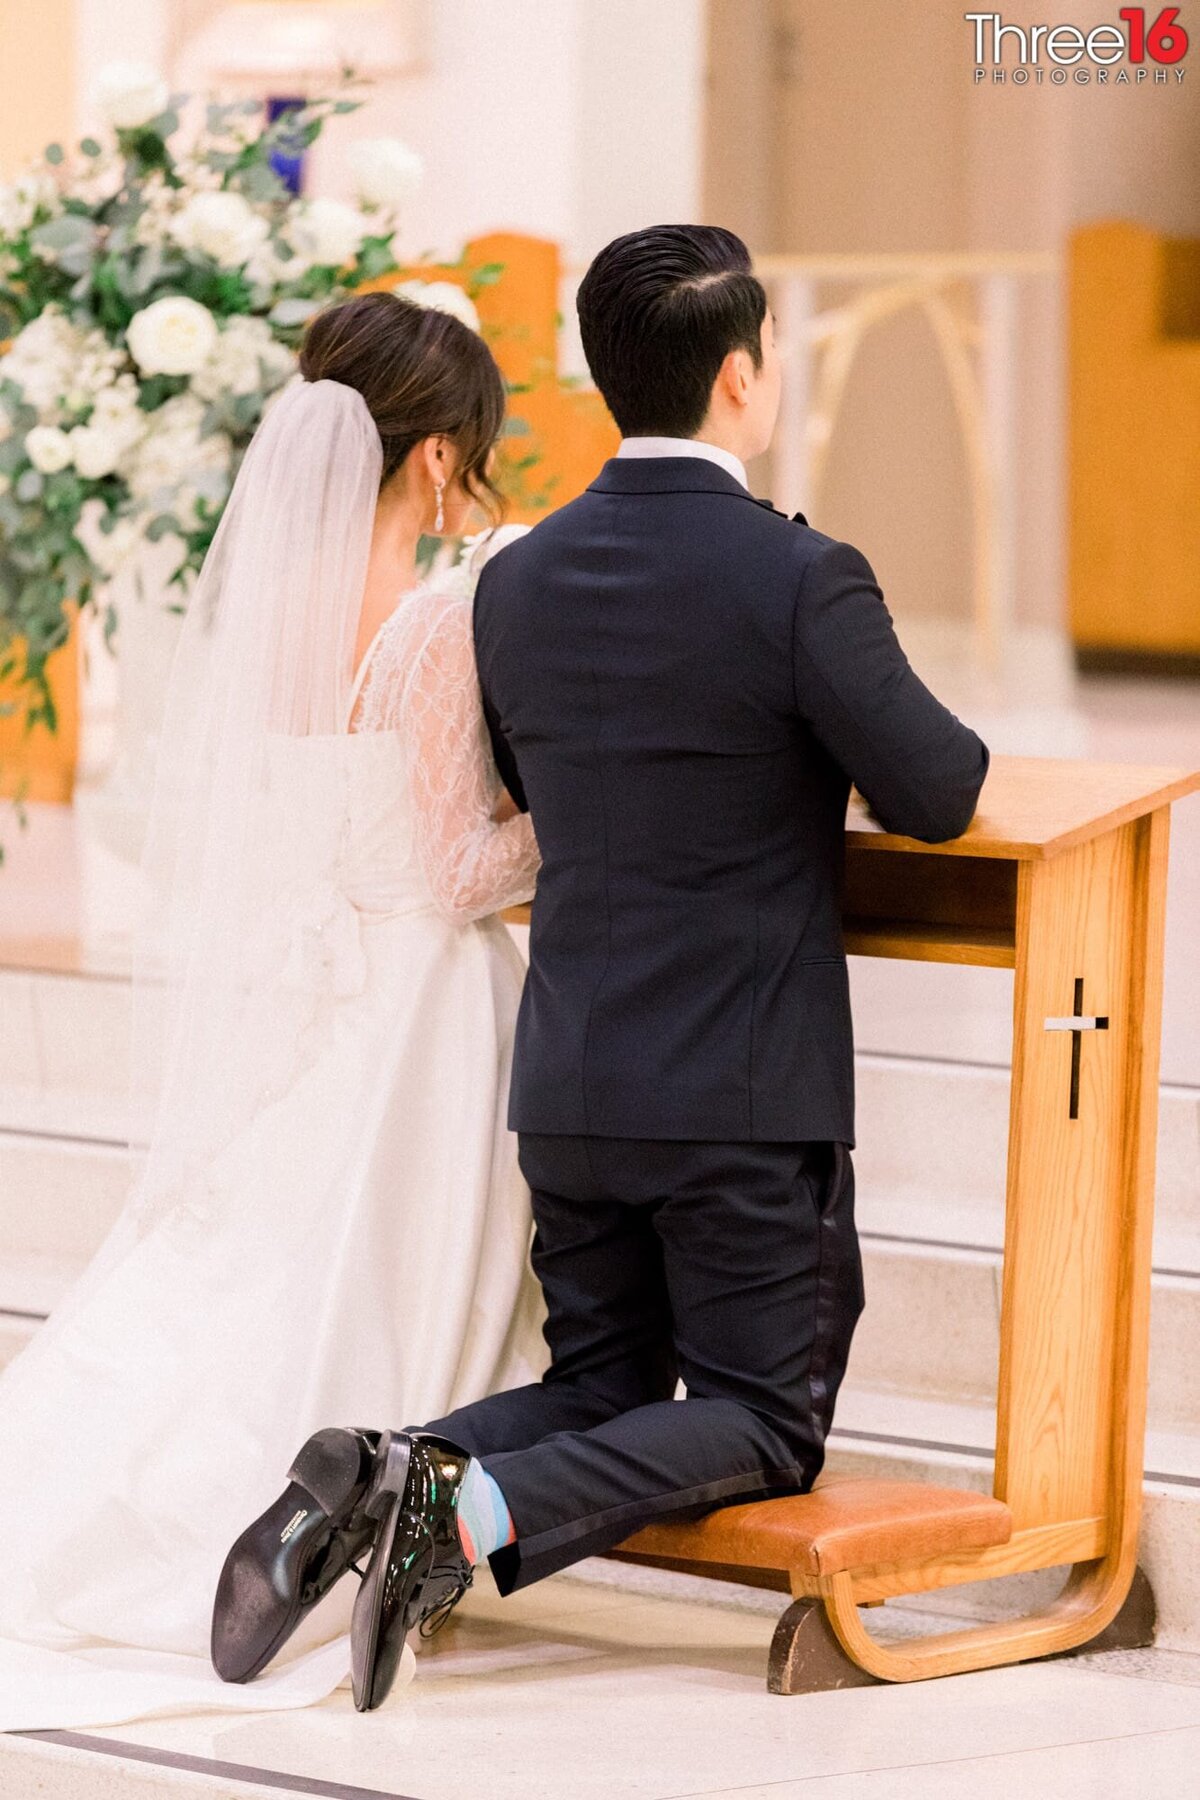 Bride and Groom kneel at the altar during a traditional Catholic church wedding